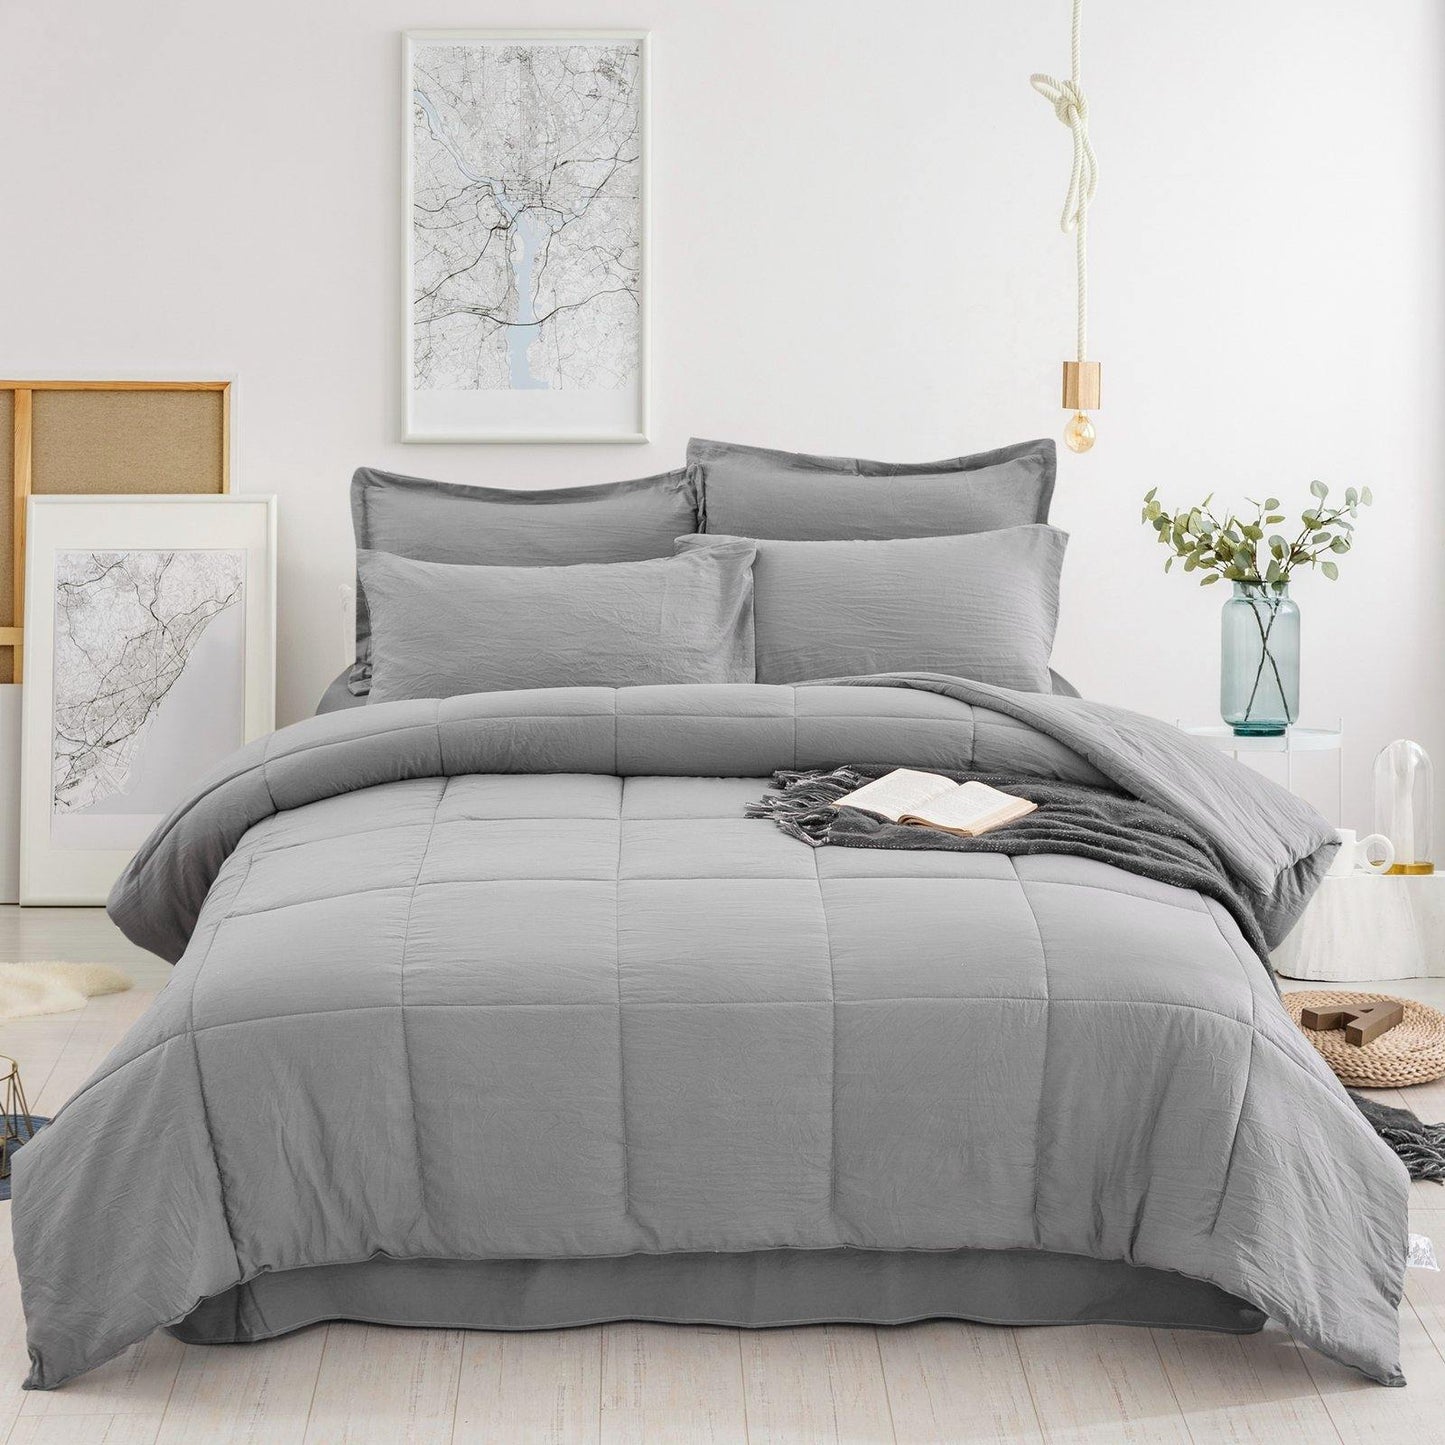 Soft Washed Microfiber Bedding Set with Sheet and Pillowshame - Wongs bedding